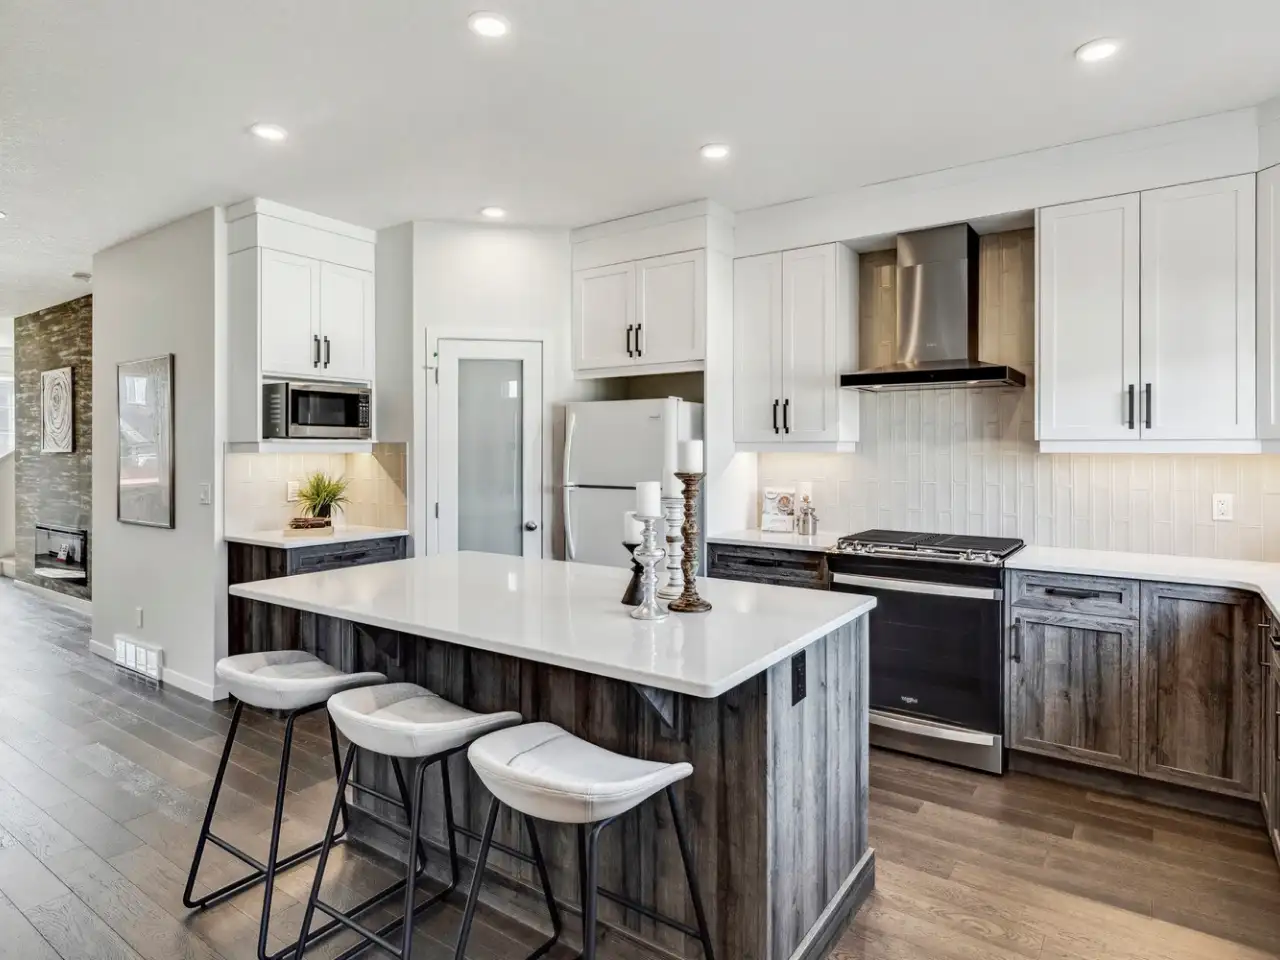 Bright and modern kitchen with stainless steel appliances, new countertops, and a welcoming ambiance, perfect for cooking and socializing in a contemporary home.